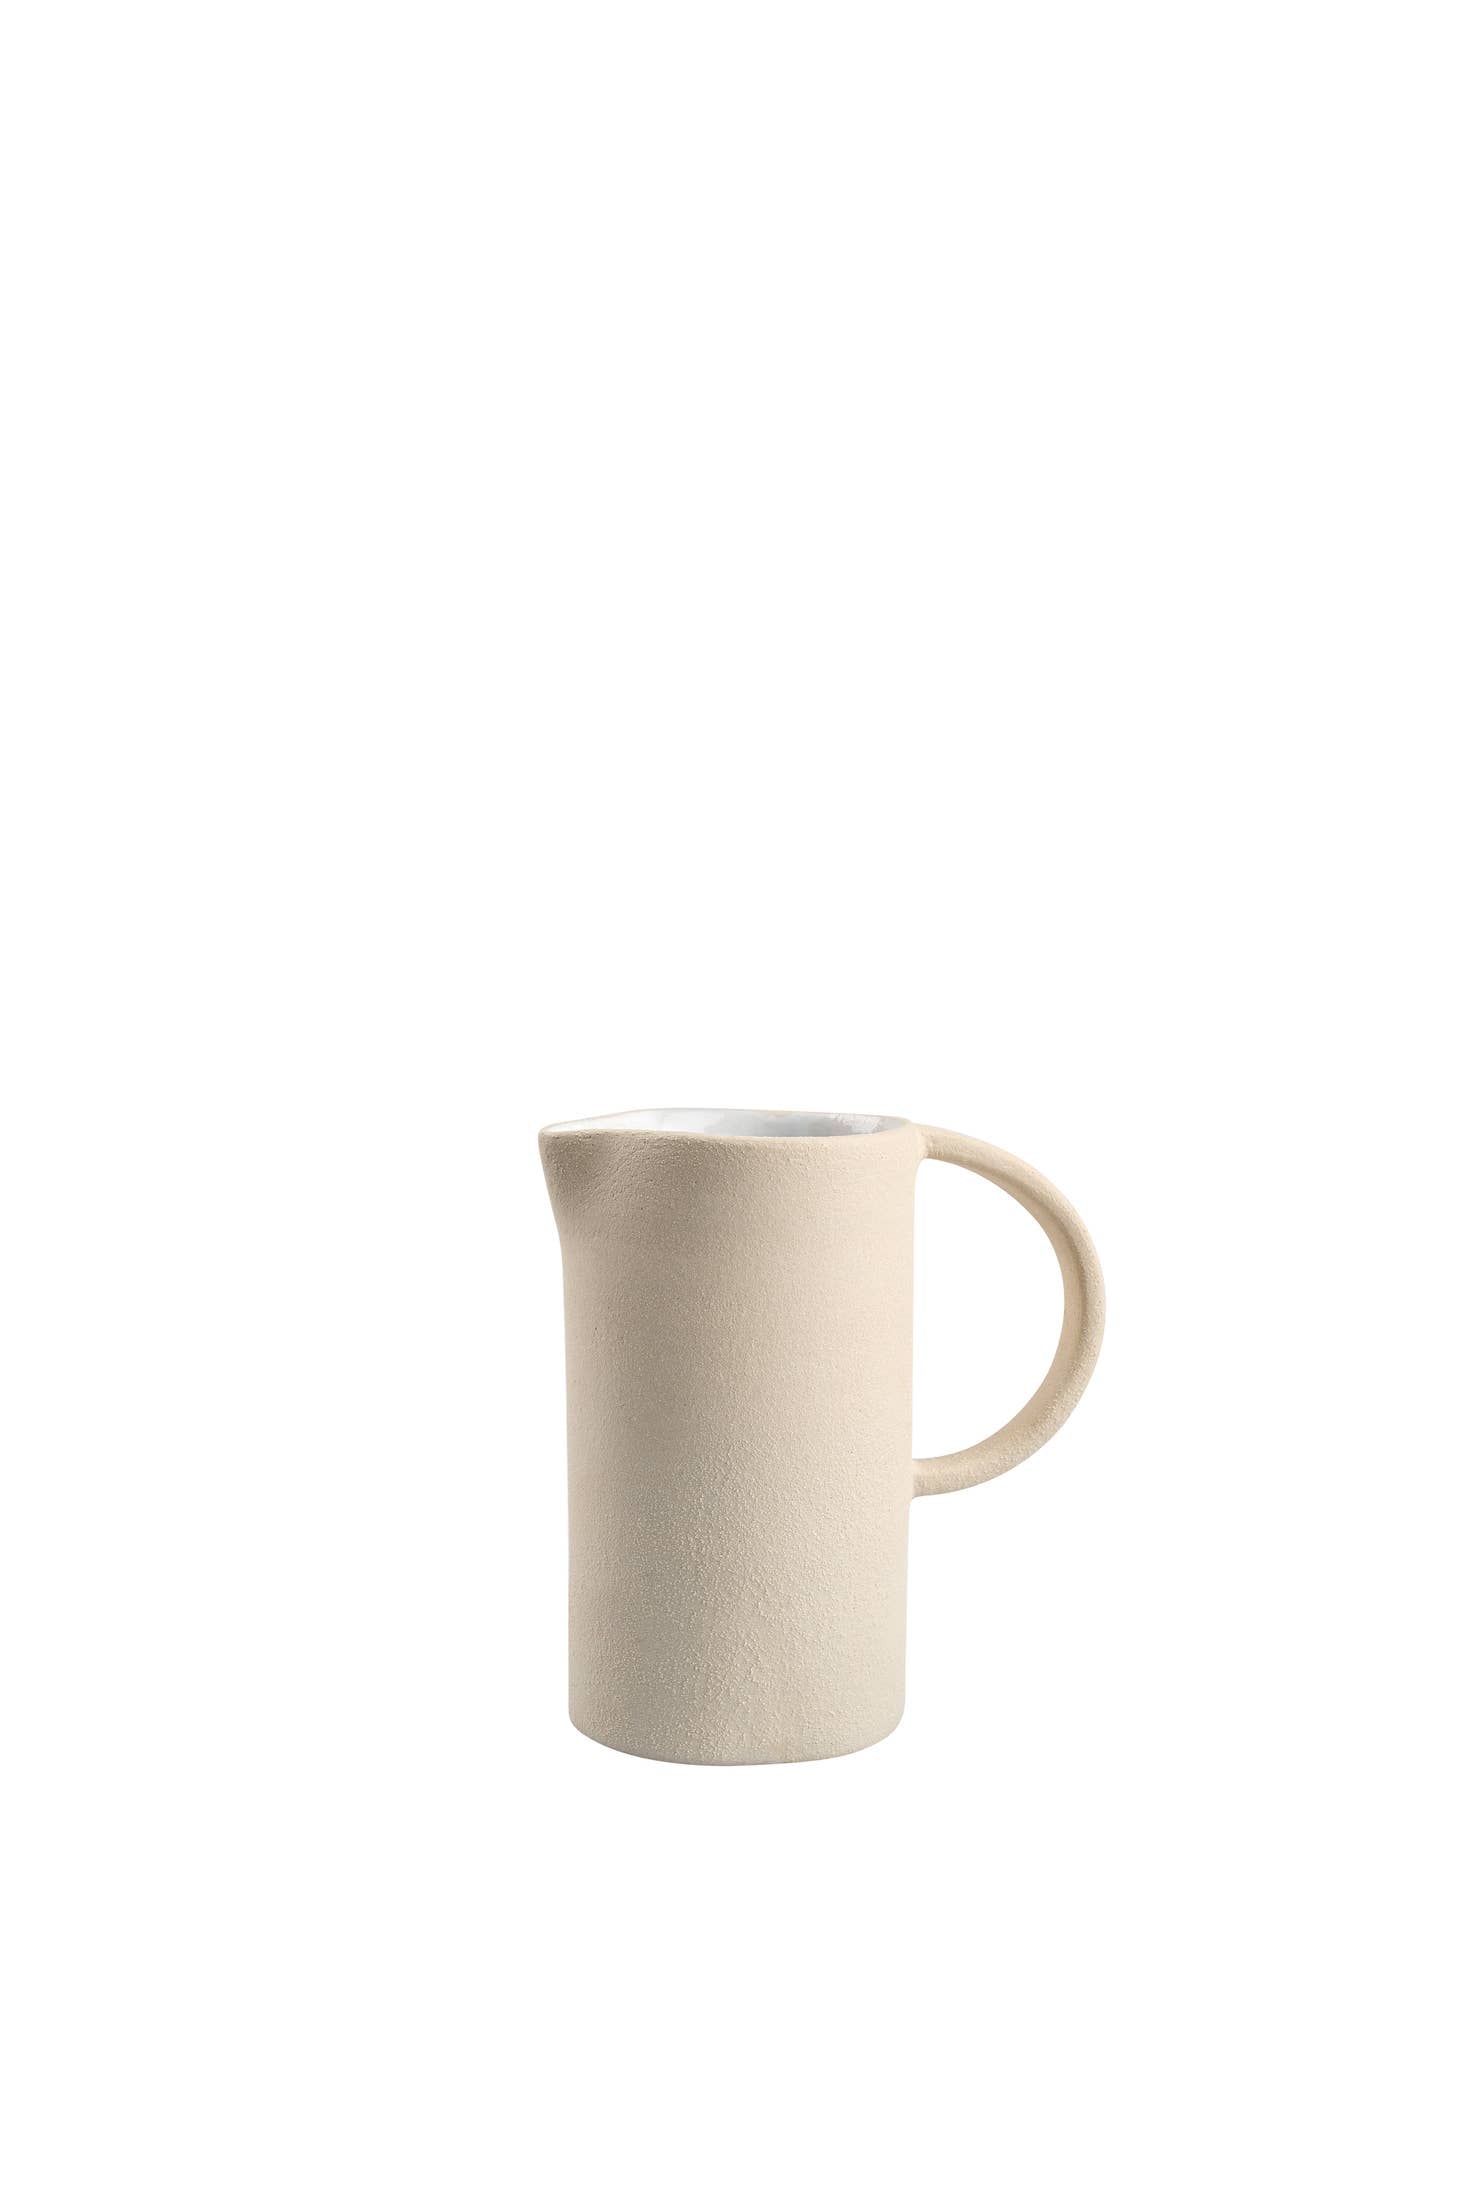 All purpose ceramic pitcher, hand crafted and finished with an interior white glaze. Dense stoneware keep hot liquids stay hot and cold liquids stay cold between pours. Handmade in Ukraine.